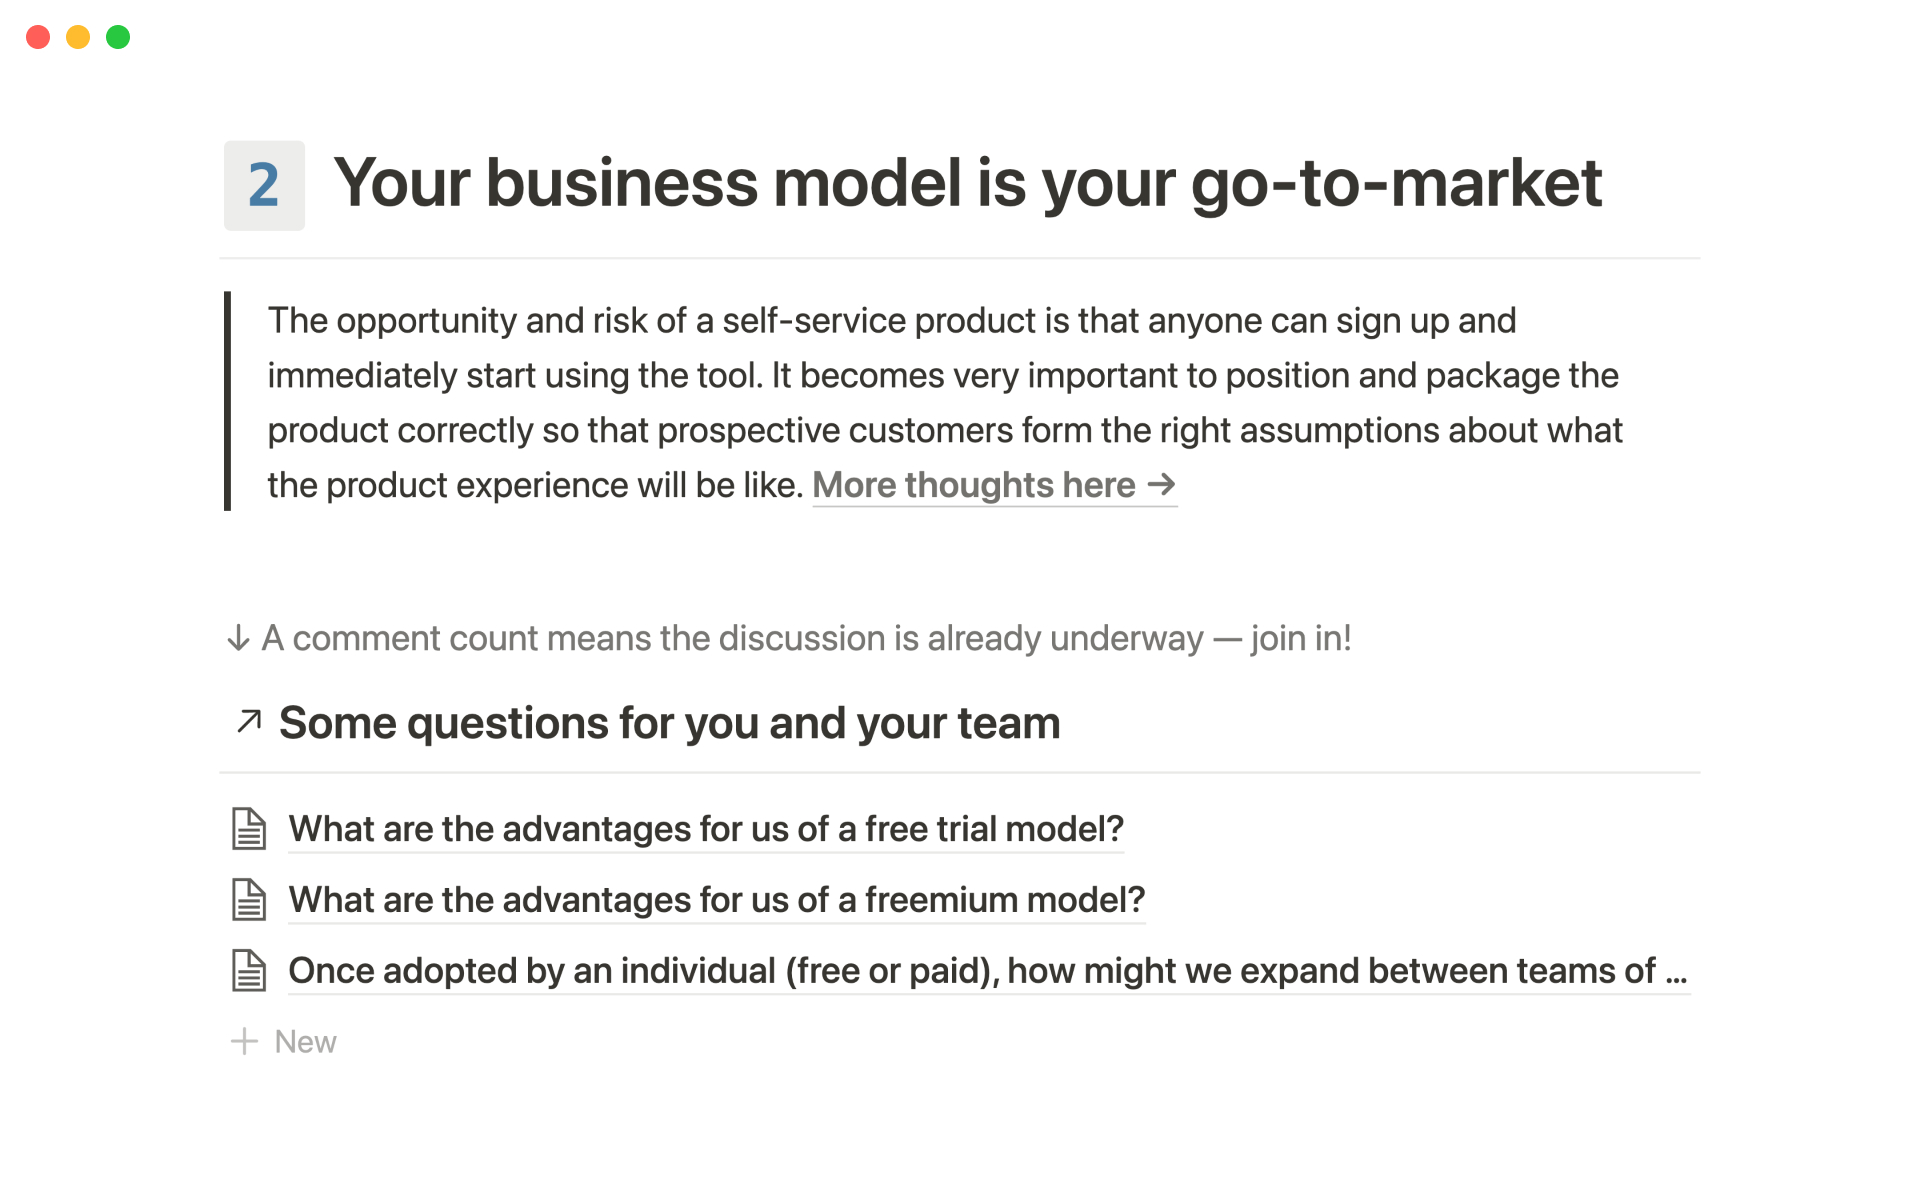 Questions relating to the four product fundamentals — your core product, business model, positioning, and first customers.